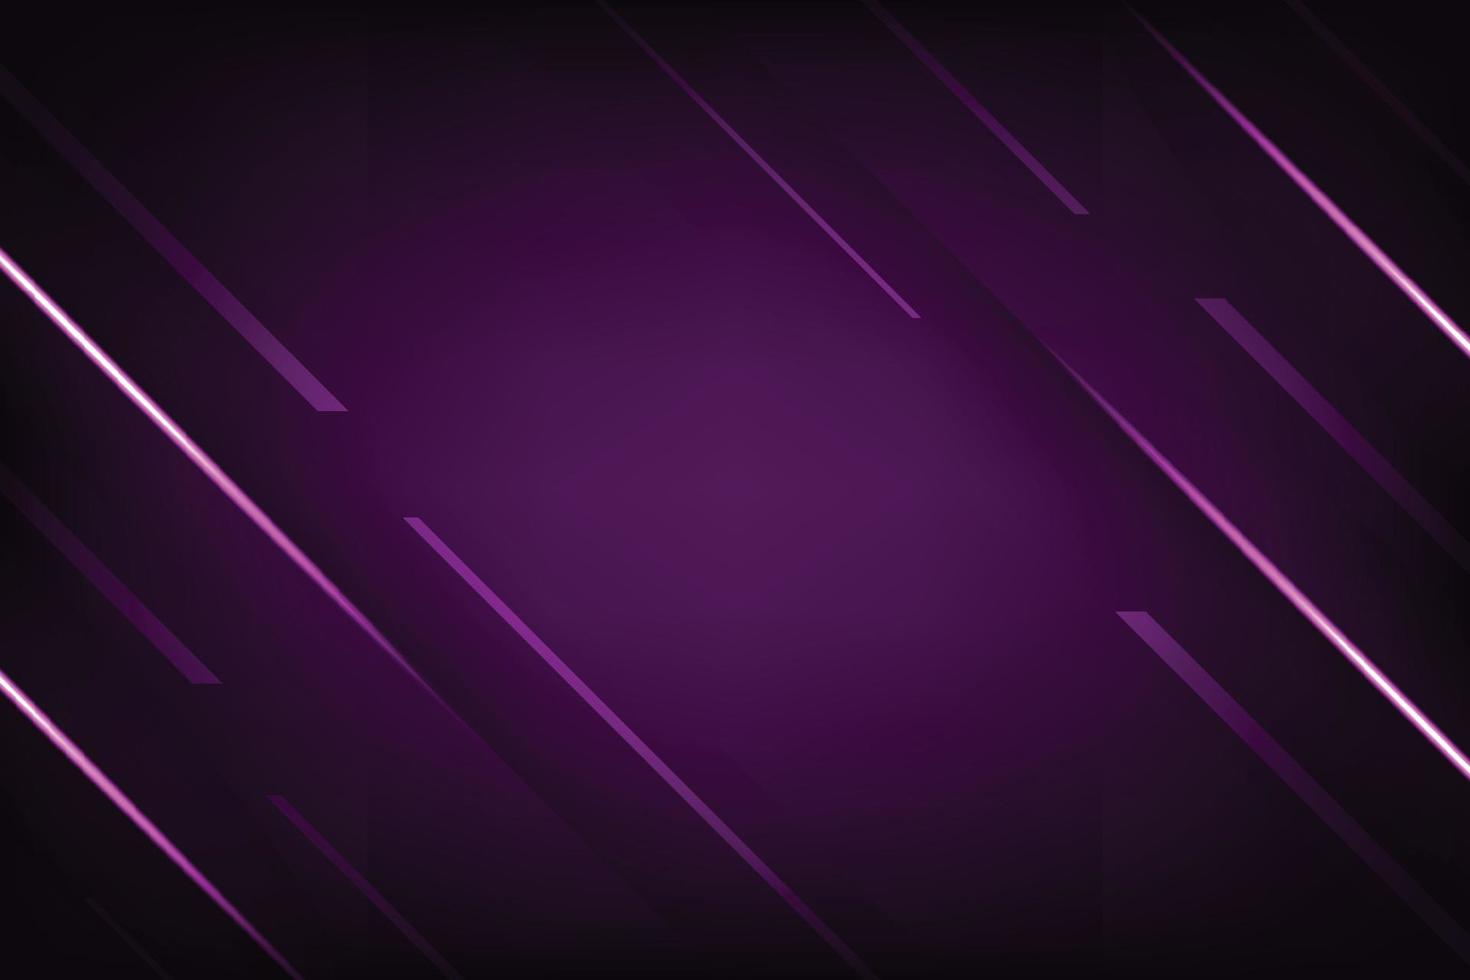 Vector purple light abstract background.